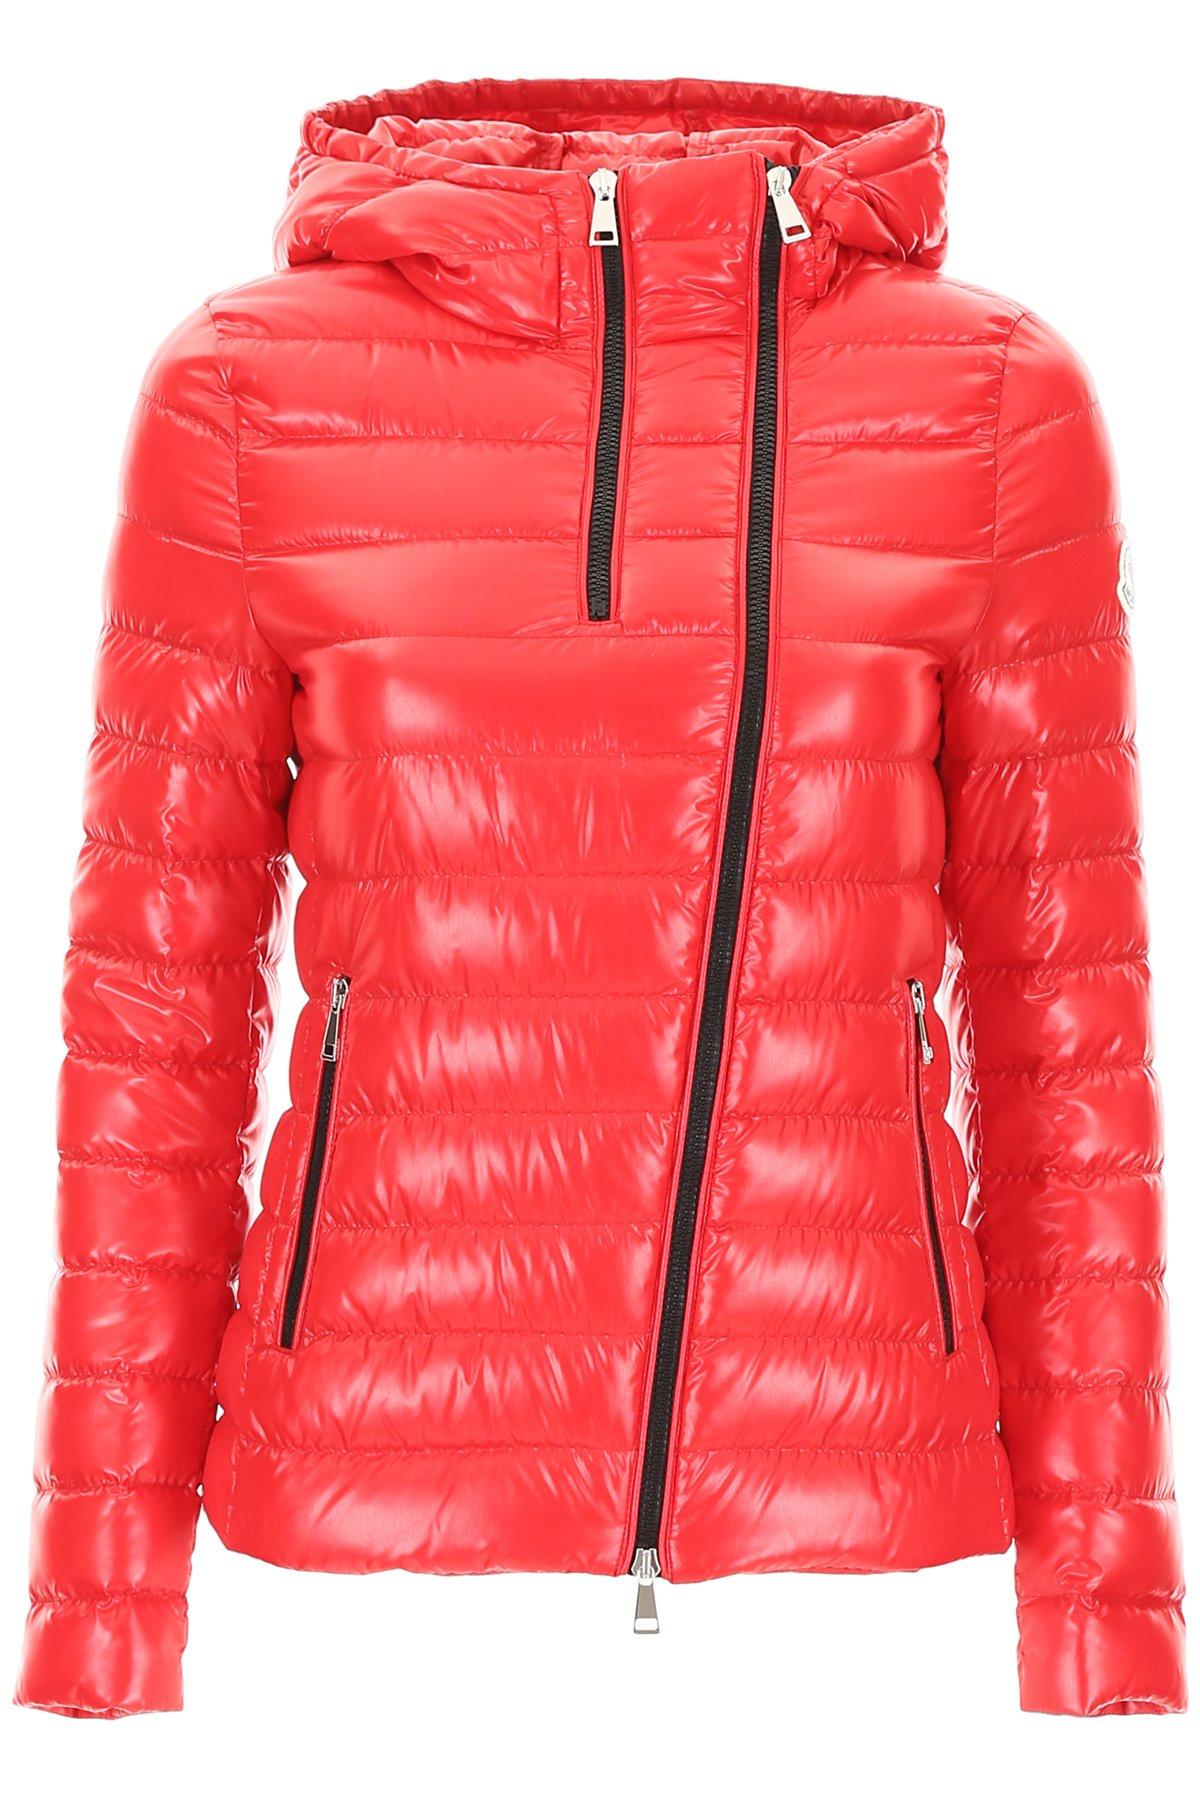 Moncler Synthetic Budapest Jacket in Red - Lyst